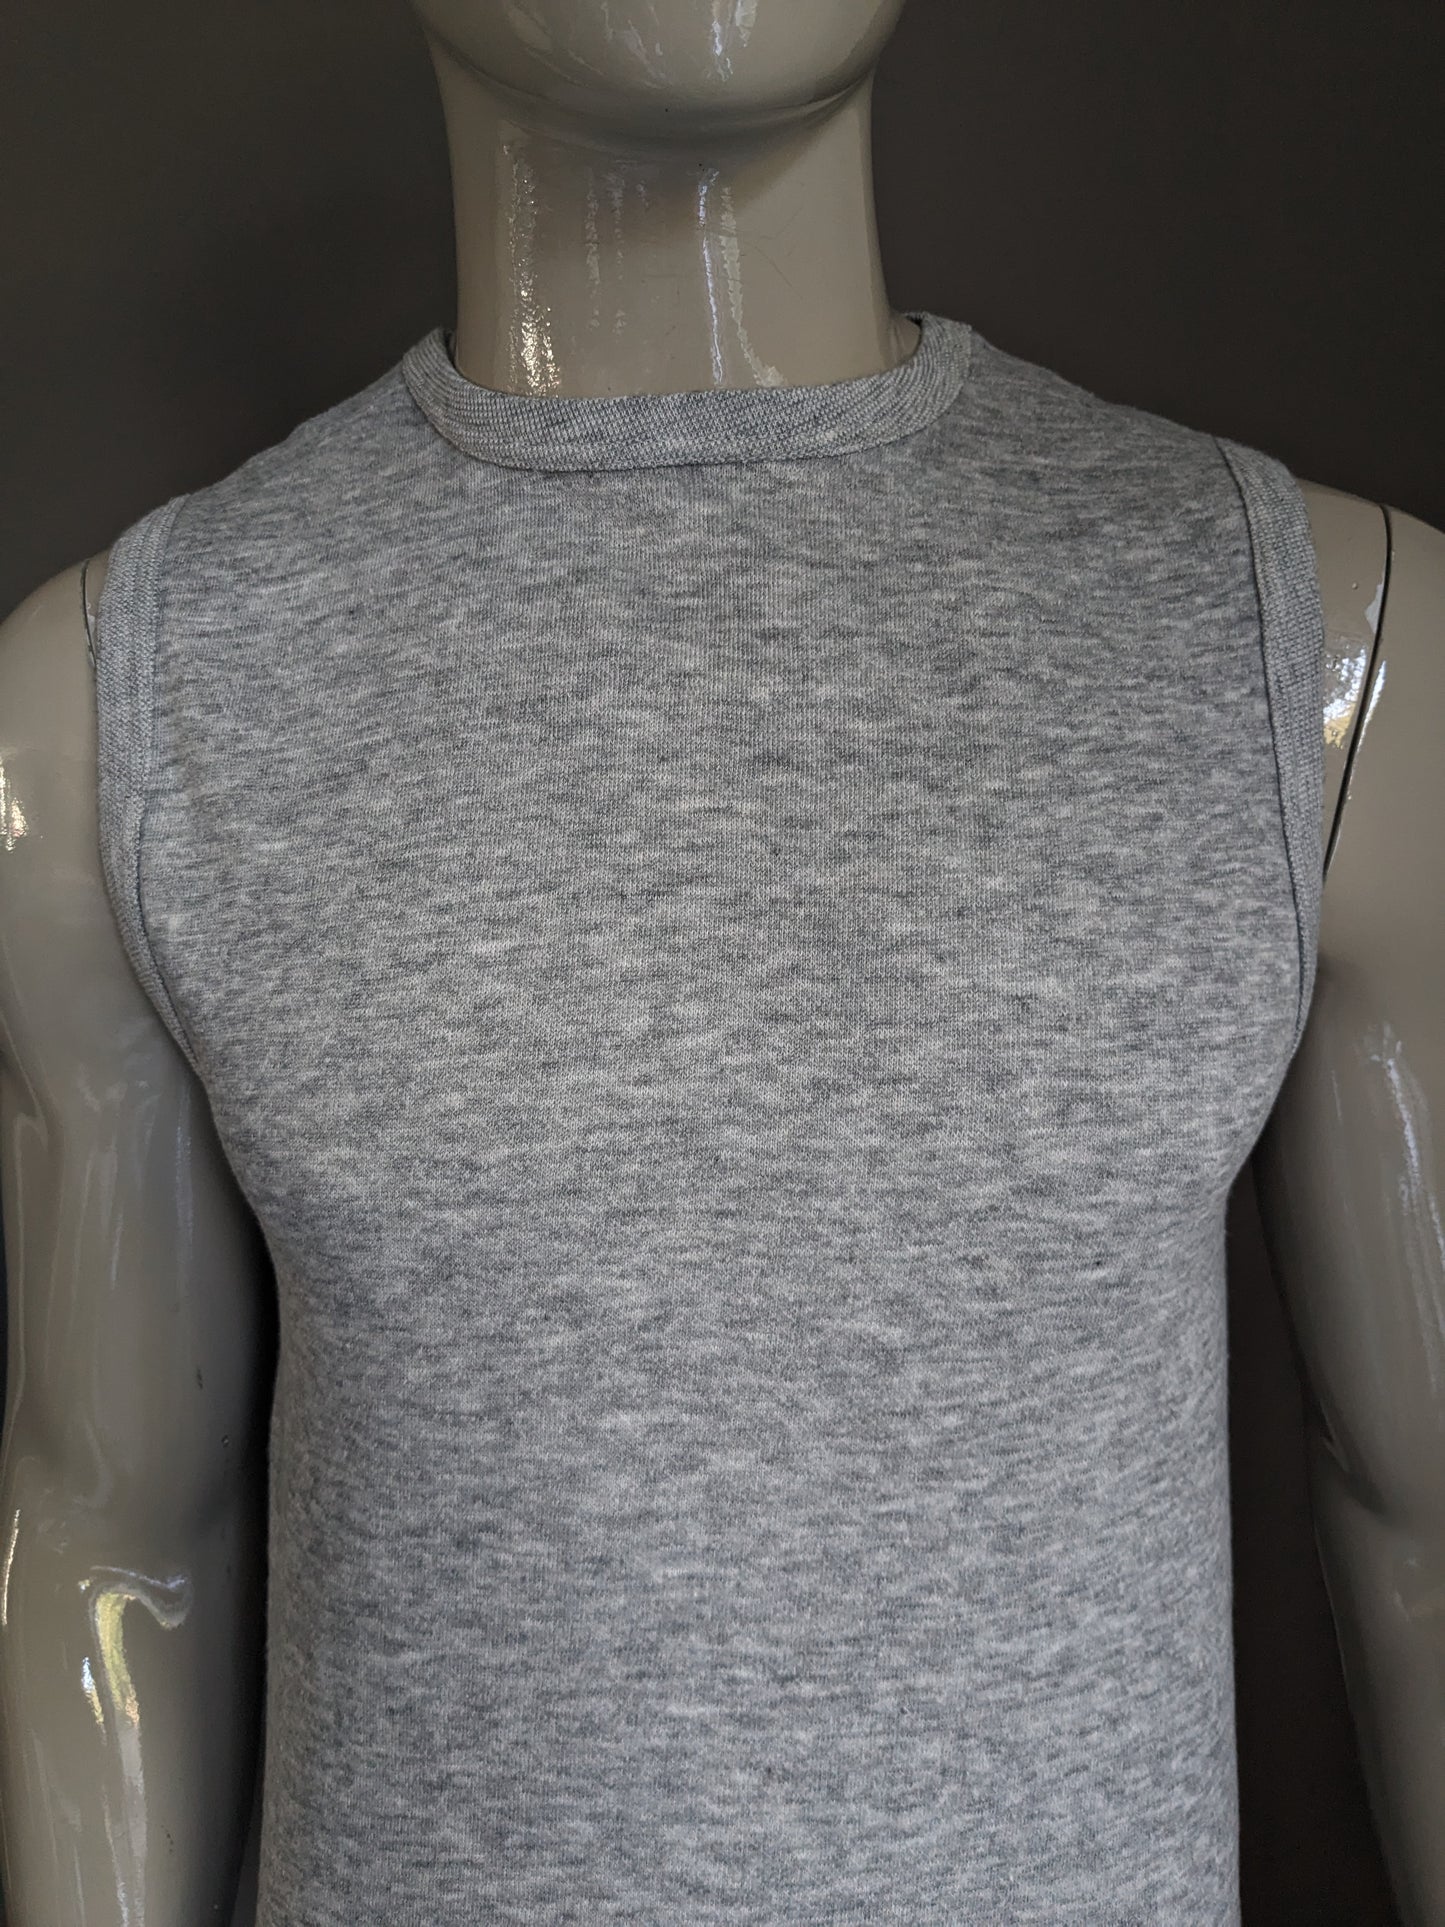 Casual Spencer. Gray mixed. Size S.